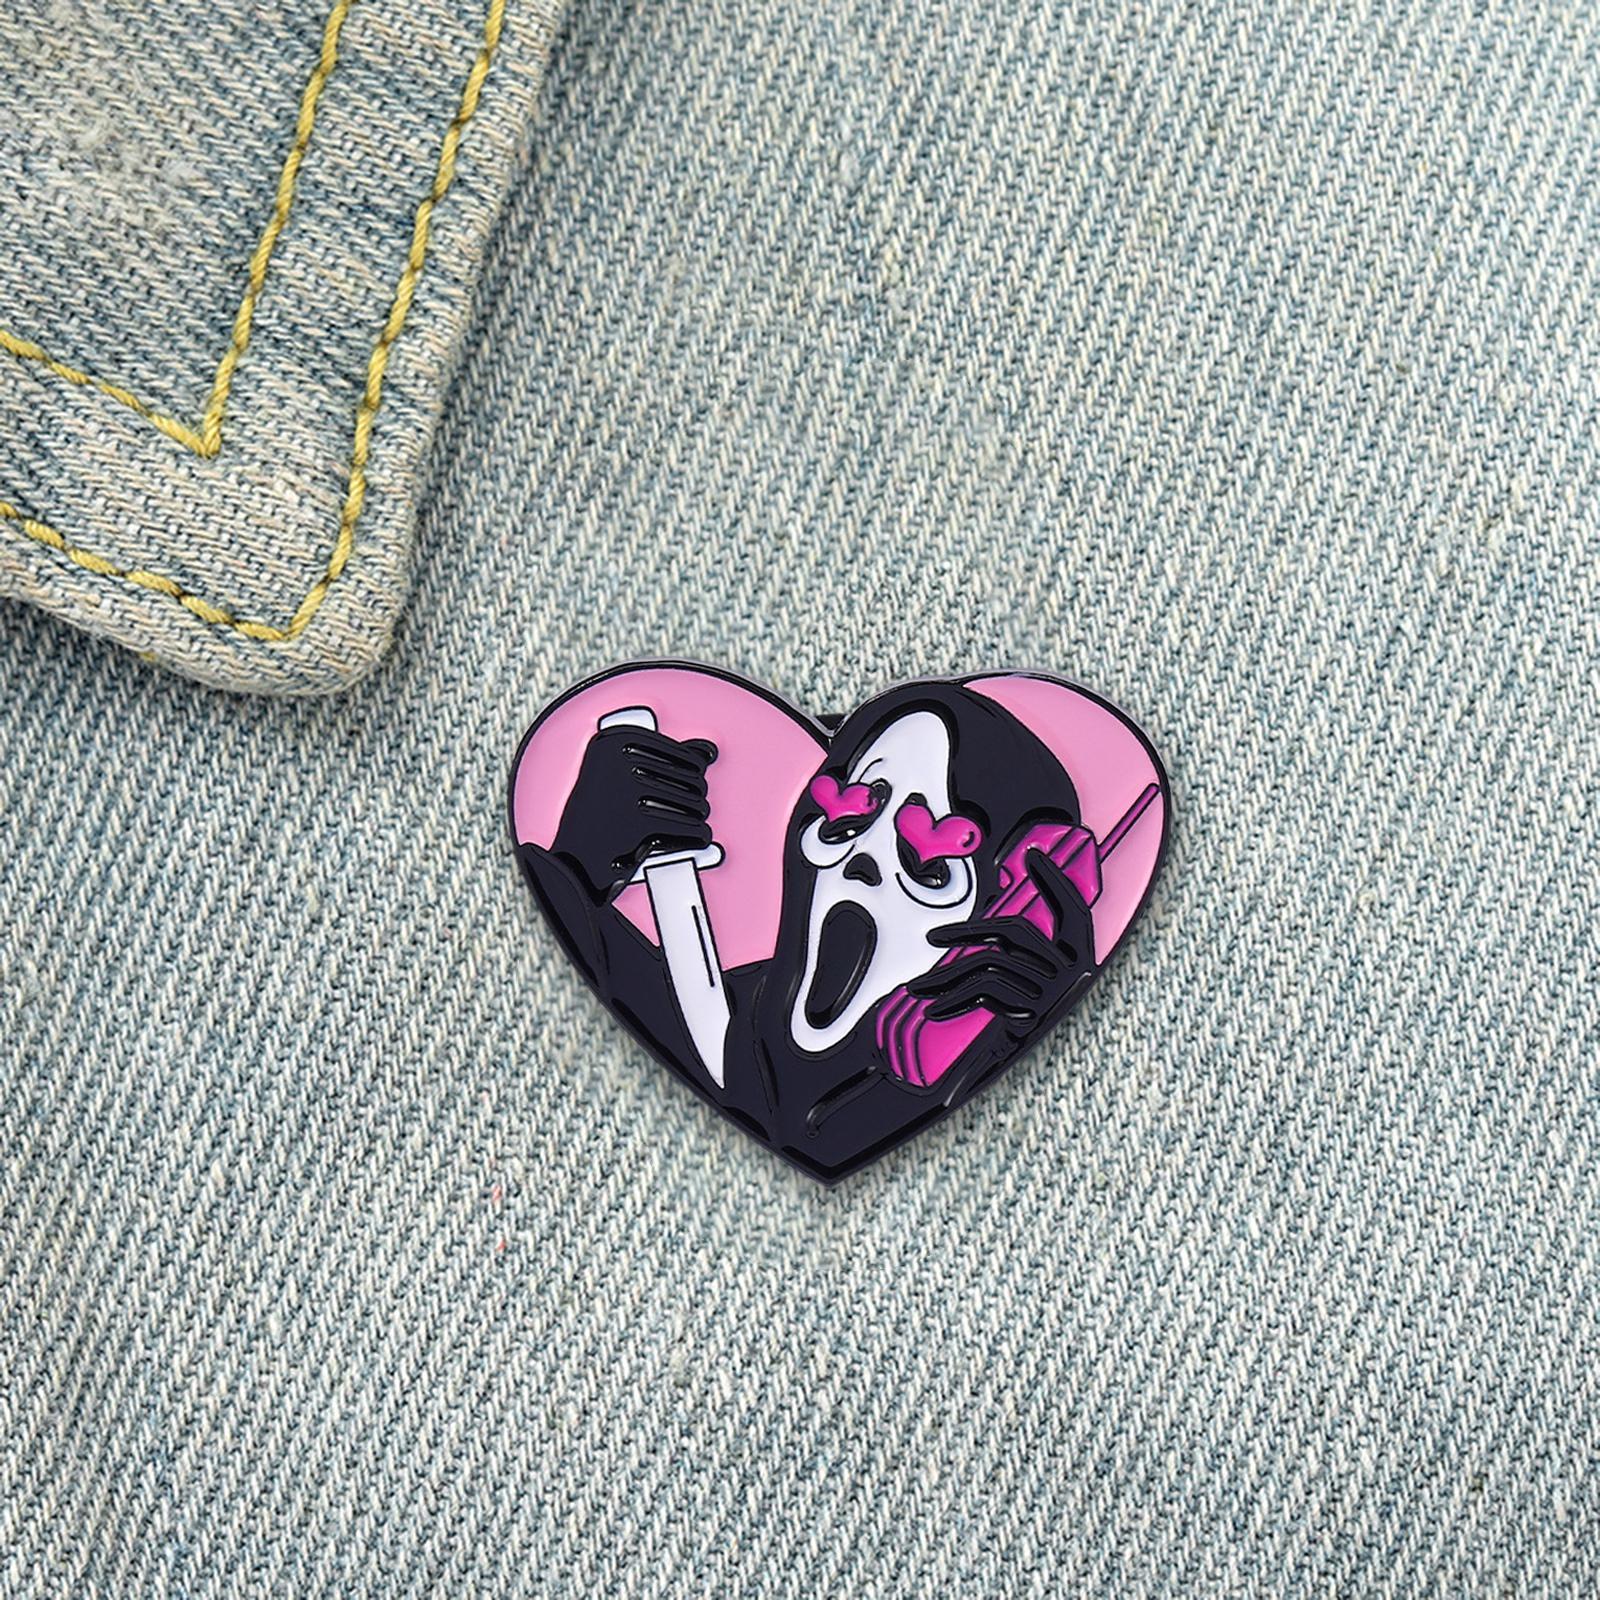 Halloween Pins Metal Brooches Cute Cartoon Lapel Pin for Clothes Hat Jackets